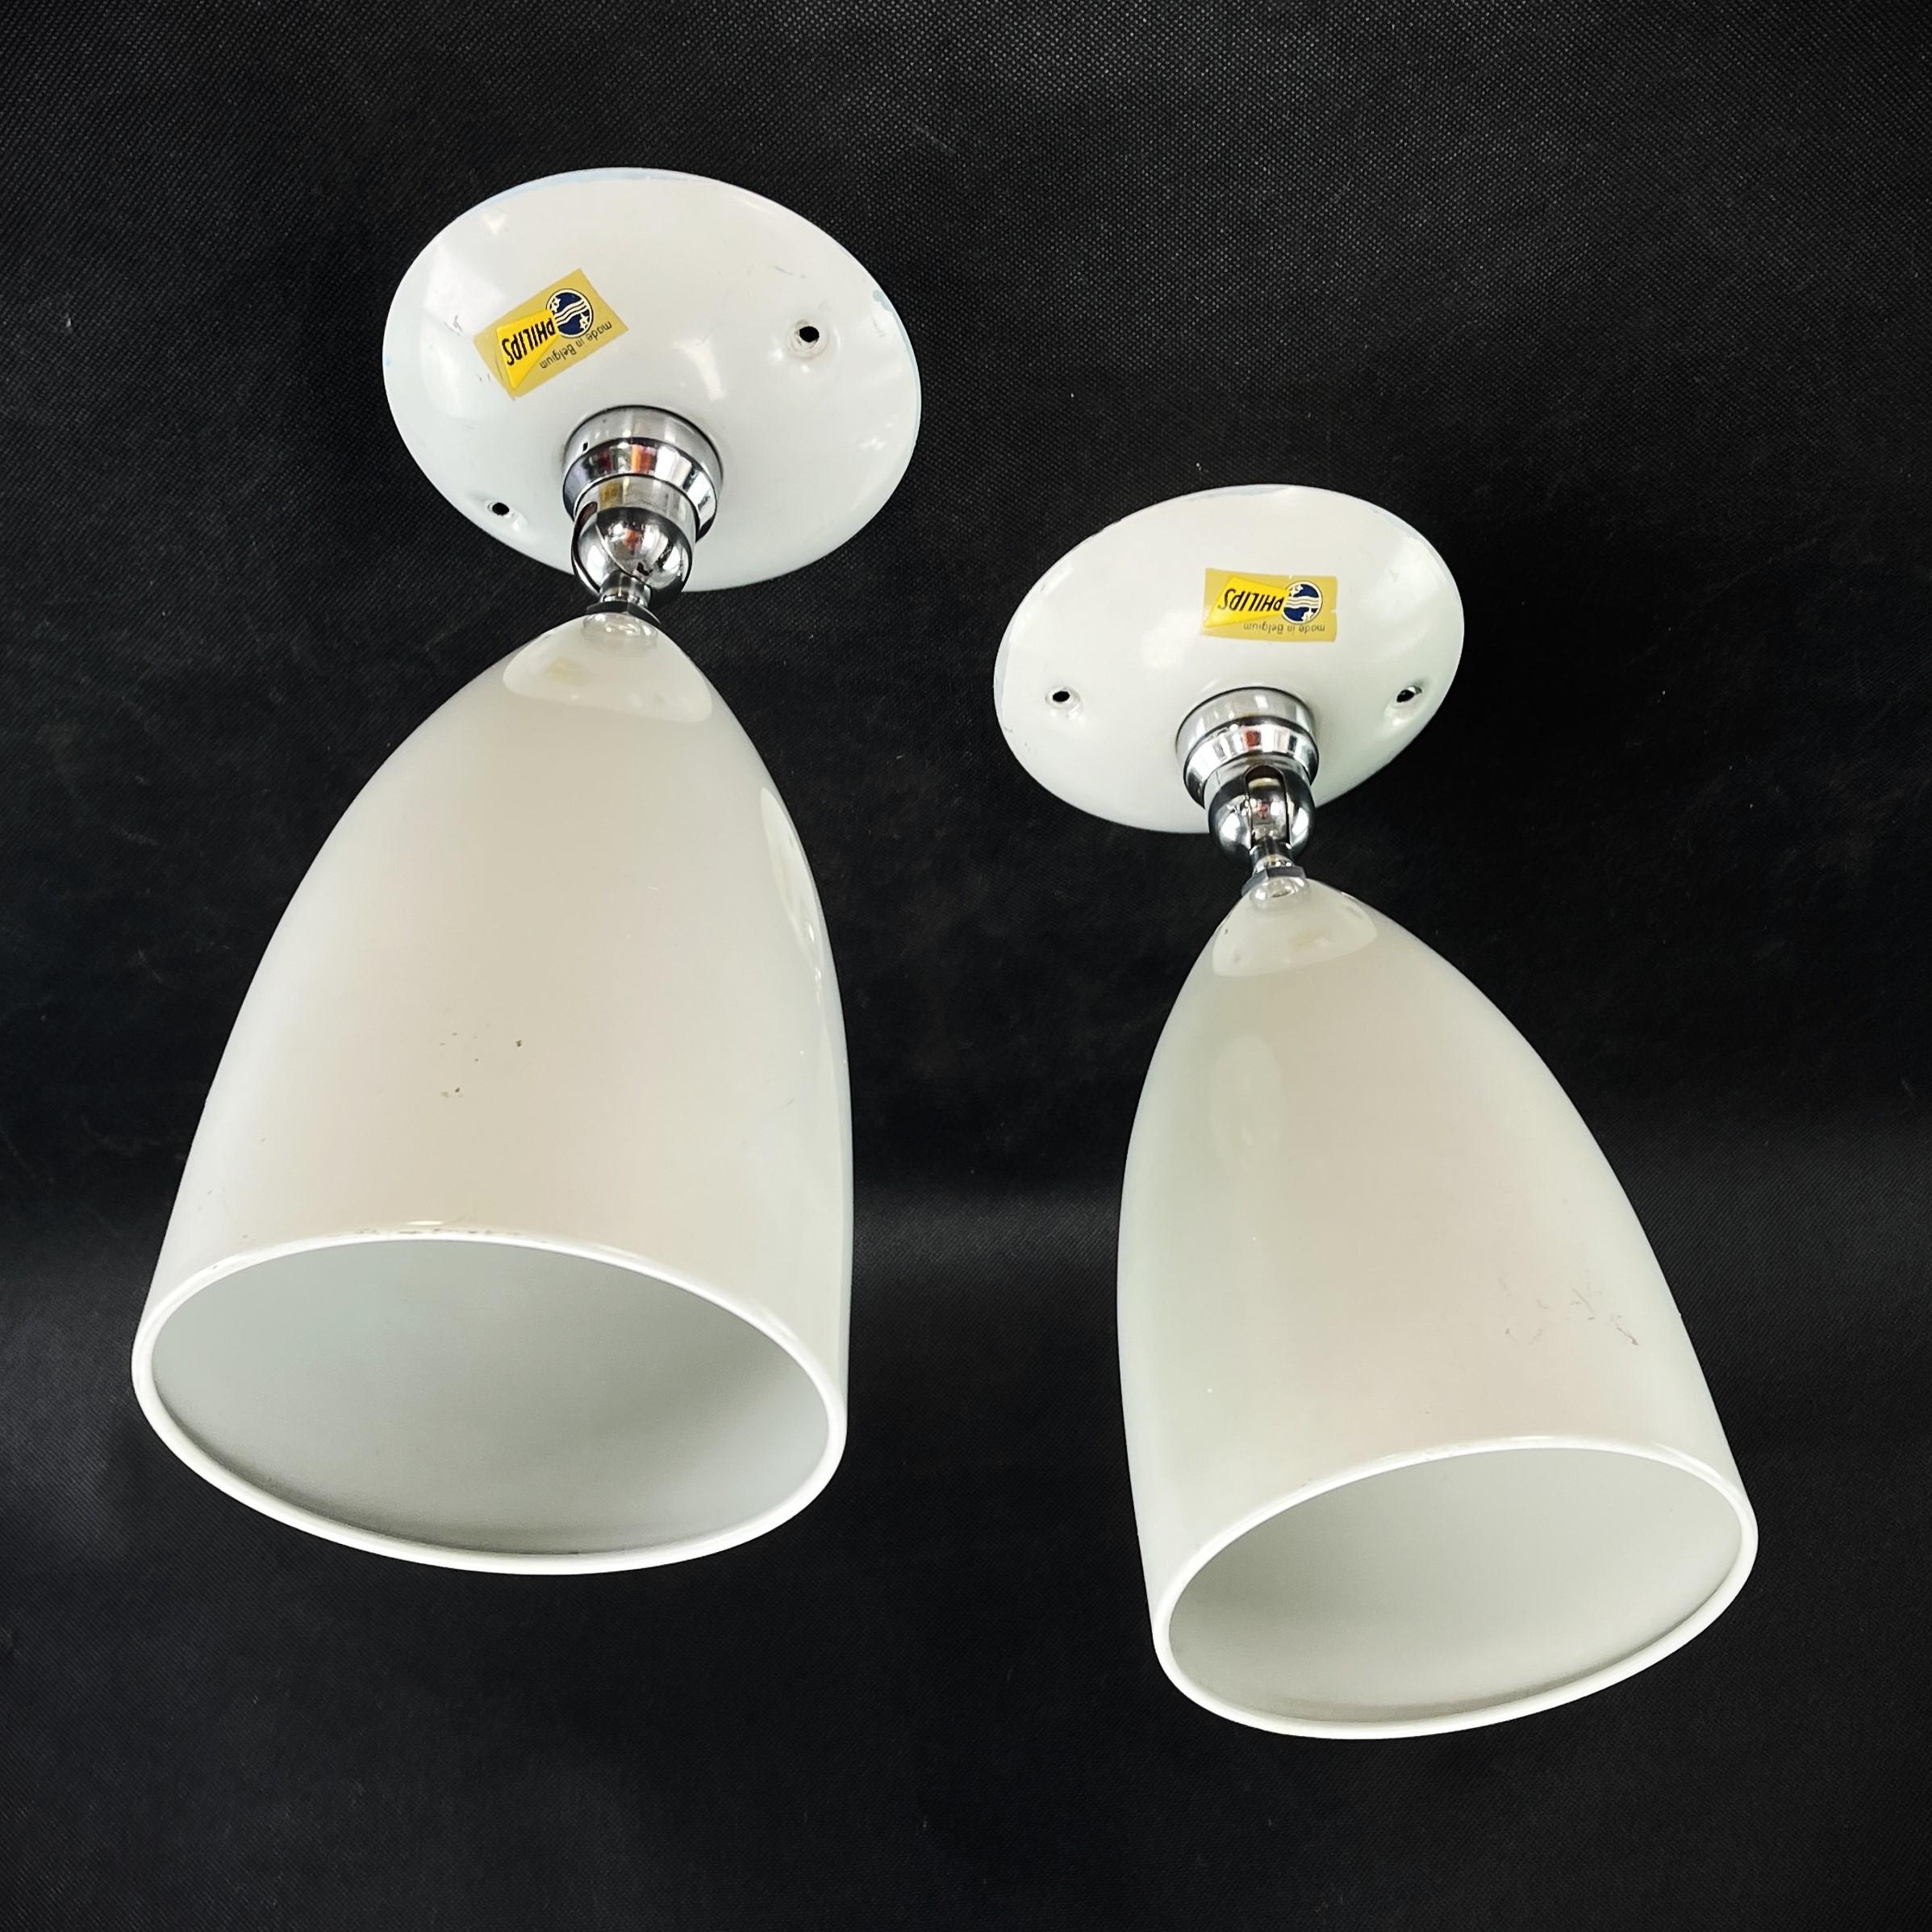 2 vintage ceiling or wall spotlights

These lamps are a real piece of vintage design history and testify to the creative minds of the Philips company.

The dynamic shape of the lamp is exemplary of the 